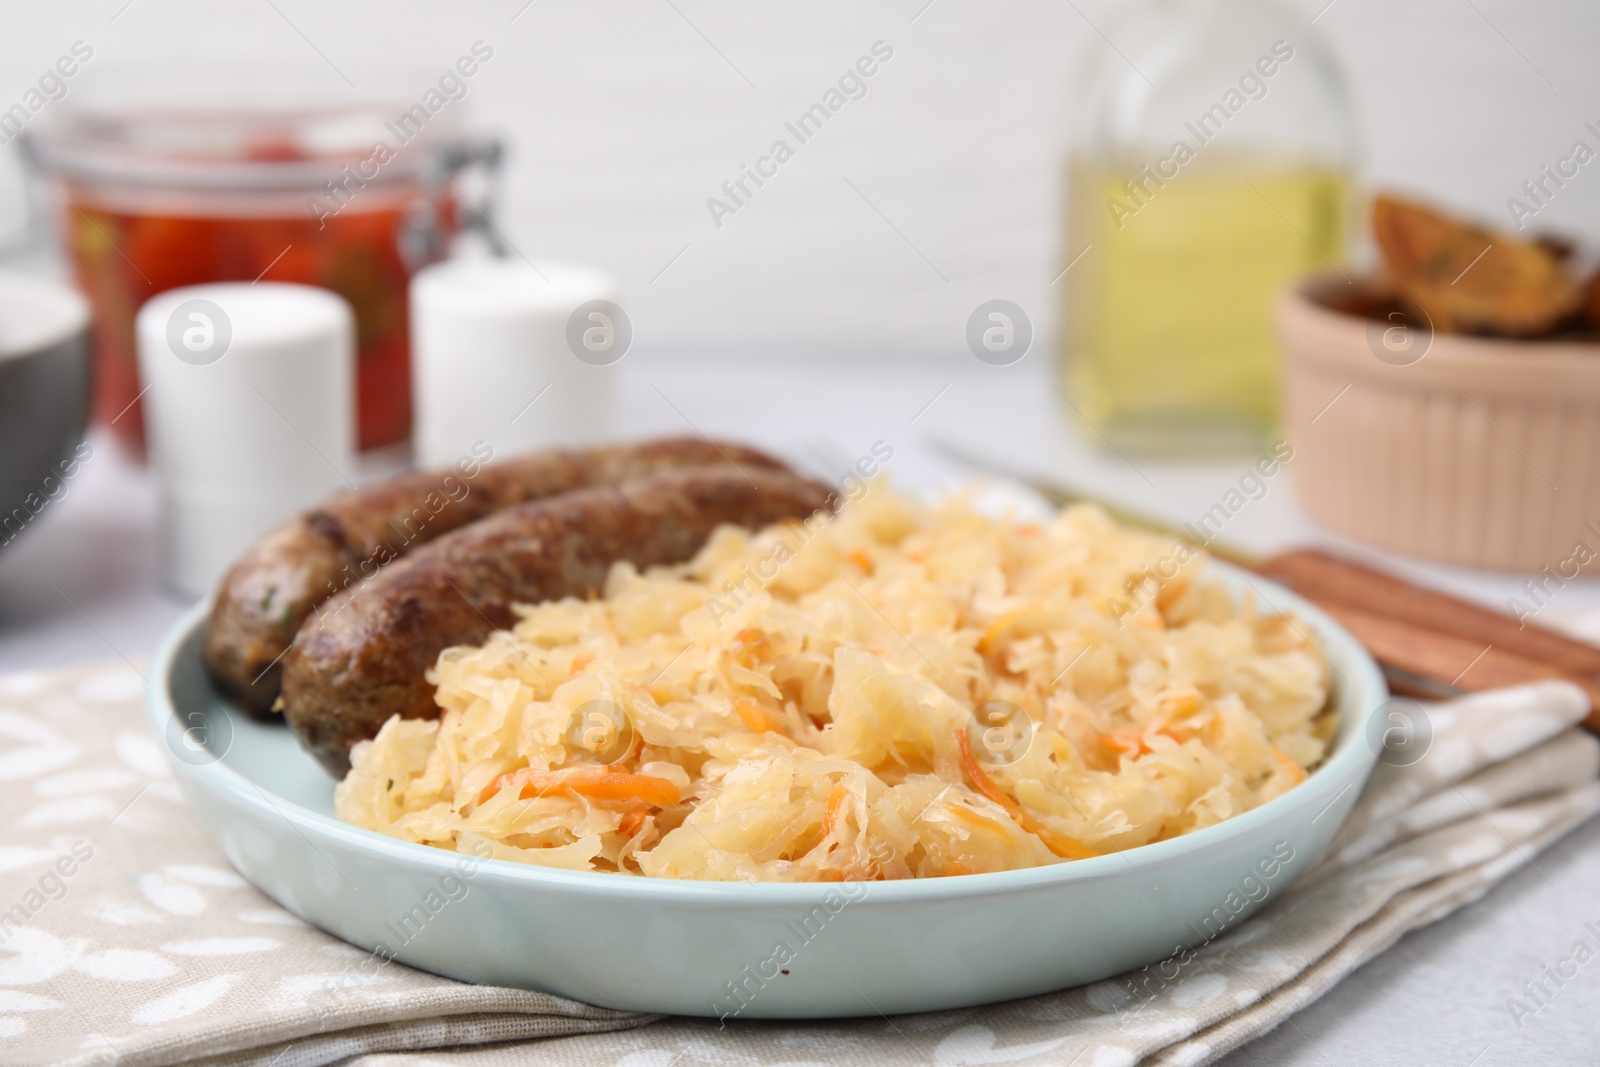 Photo of Plate with sauerkraut and sausages on table